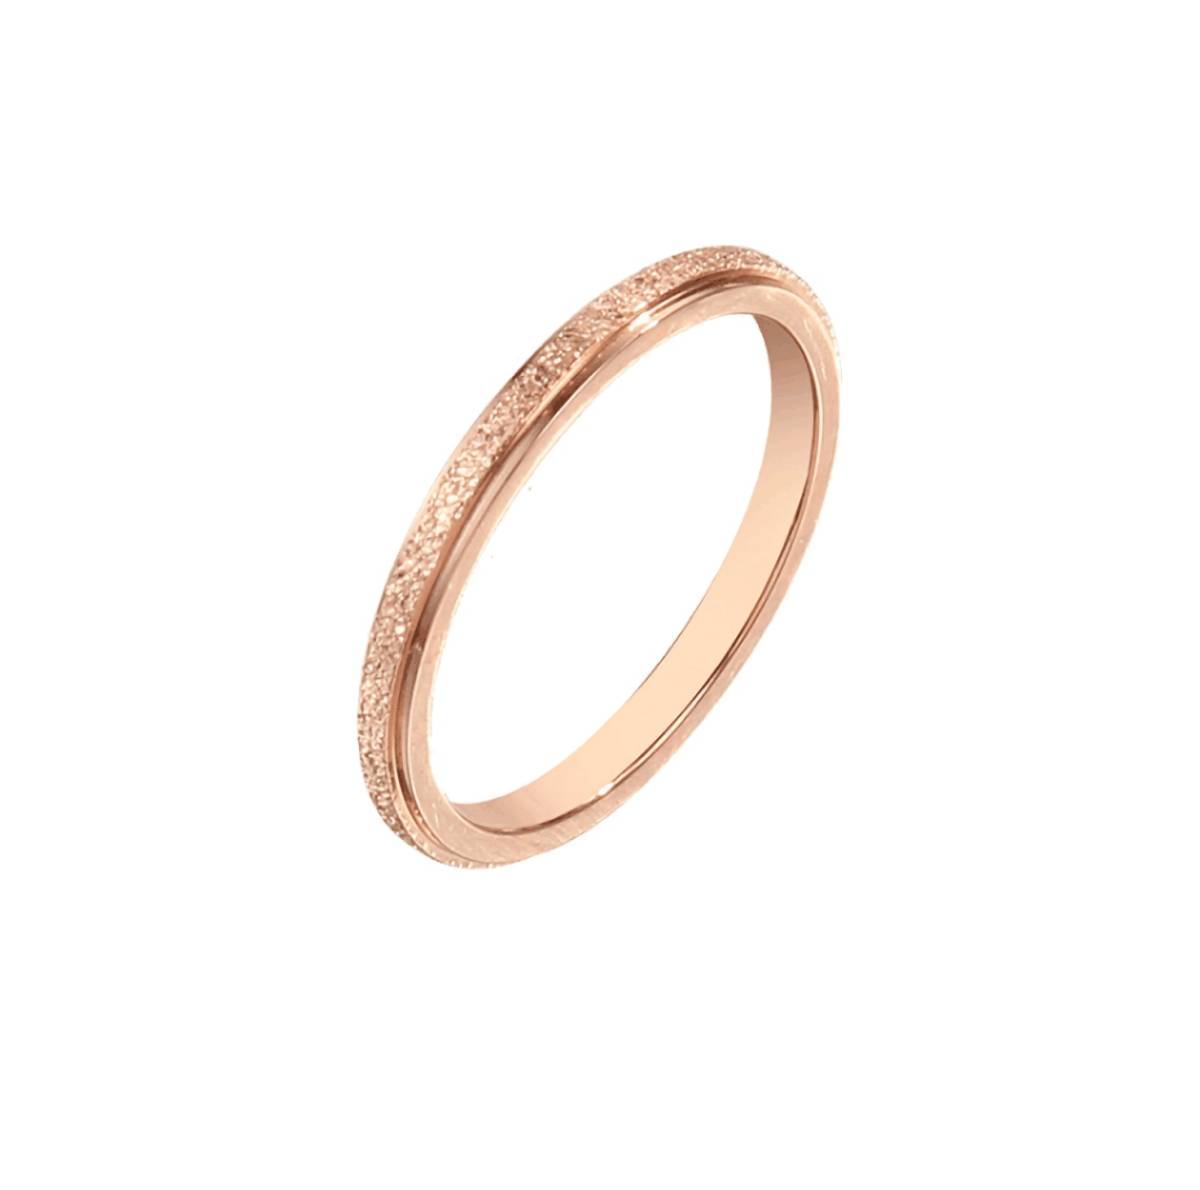  free shipping *. approximately ring 9 number /11 number /13 number /14 number /16 number /18 number /19 number stainless steel simple ring * pink gold 